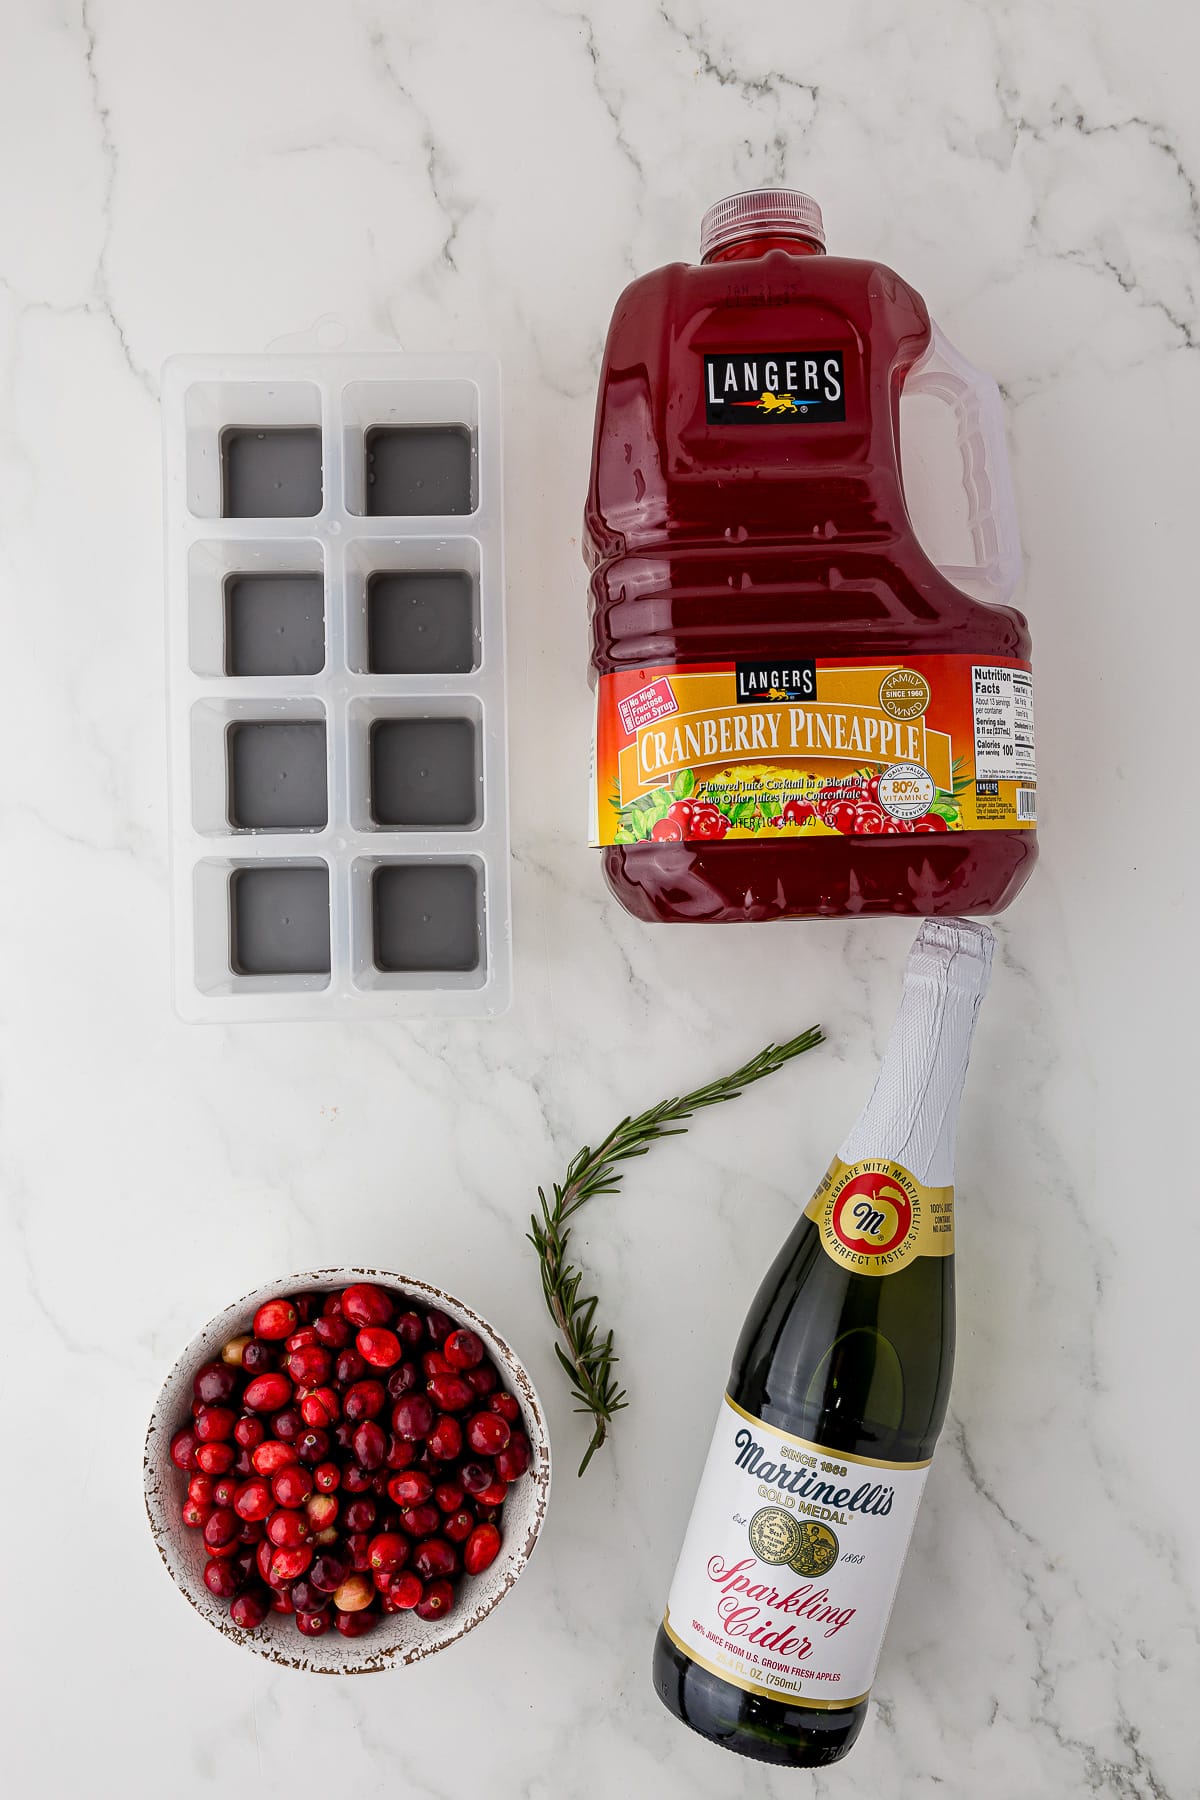 square ice cube tray, langer's cranberry pineapple juice, a sprig of rosemary, a bowl of cranberries, and a bottle of martinelli's sparkling cider all on a white countertop